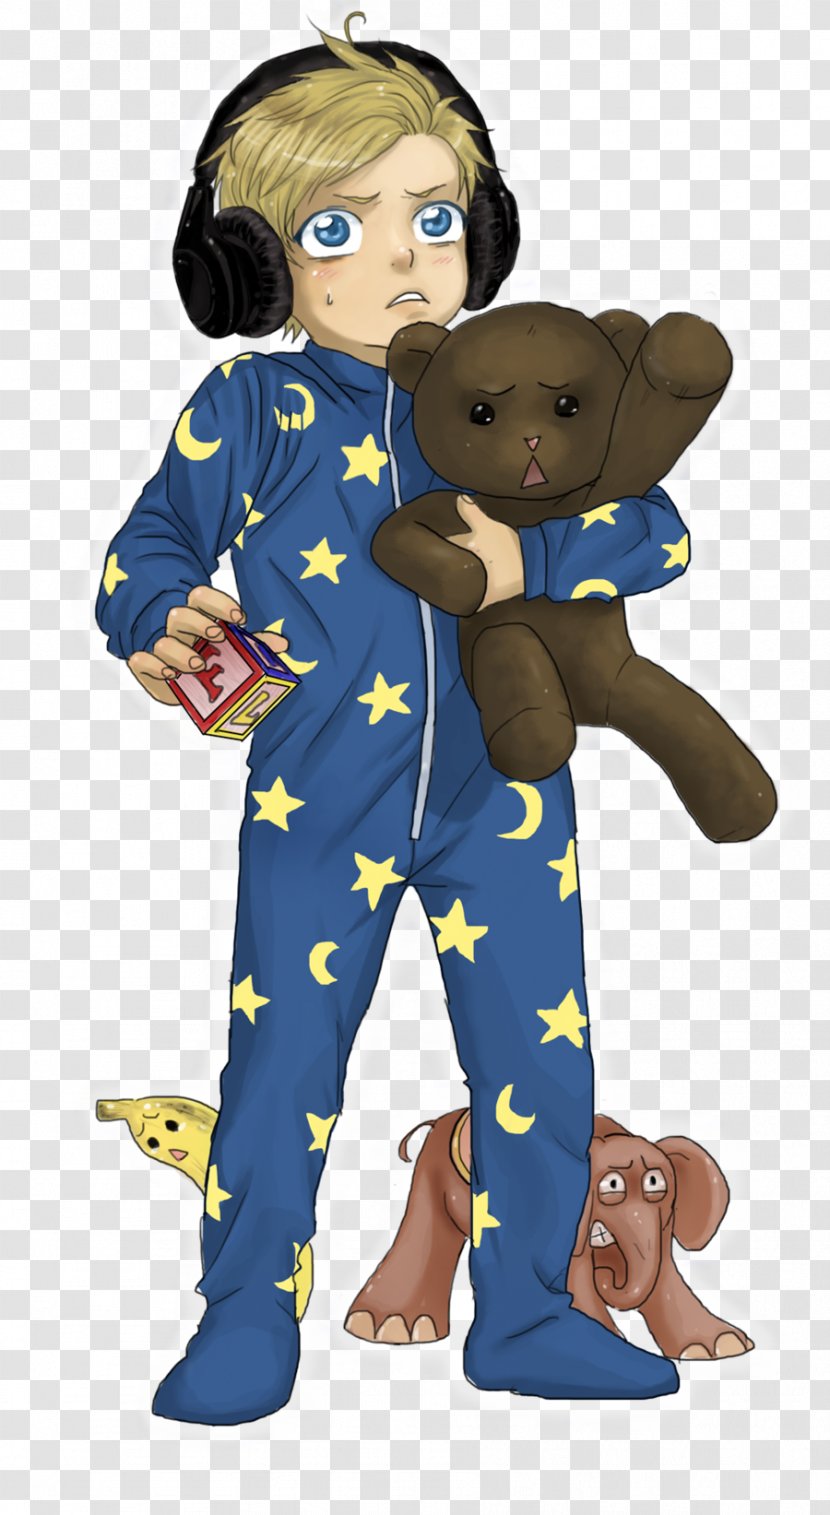 Among The Sleep Fan Art Character - Silhouette Transparent PNG